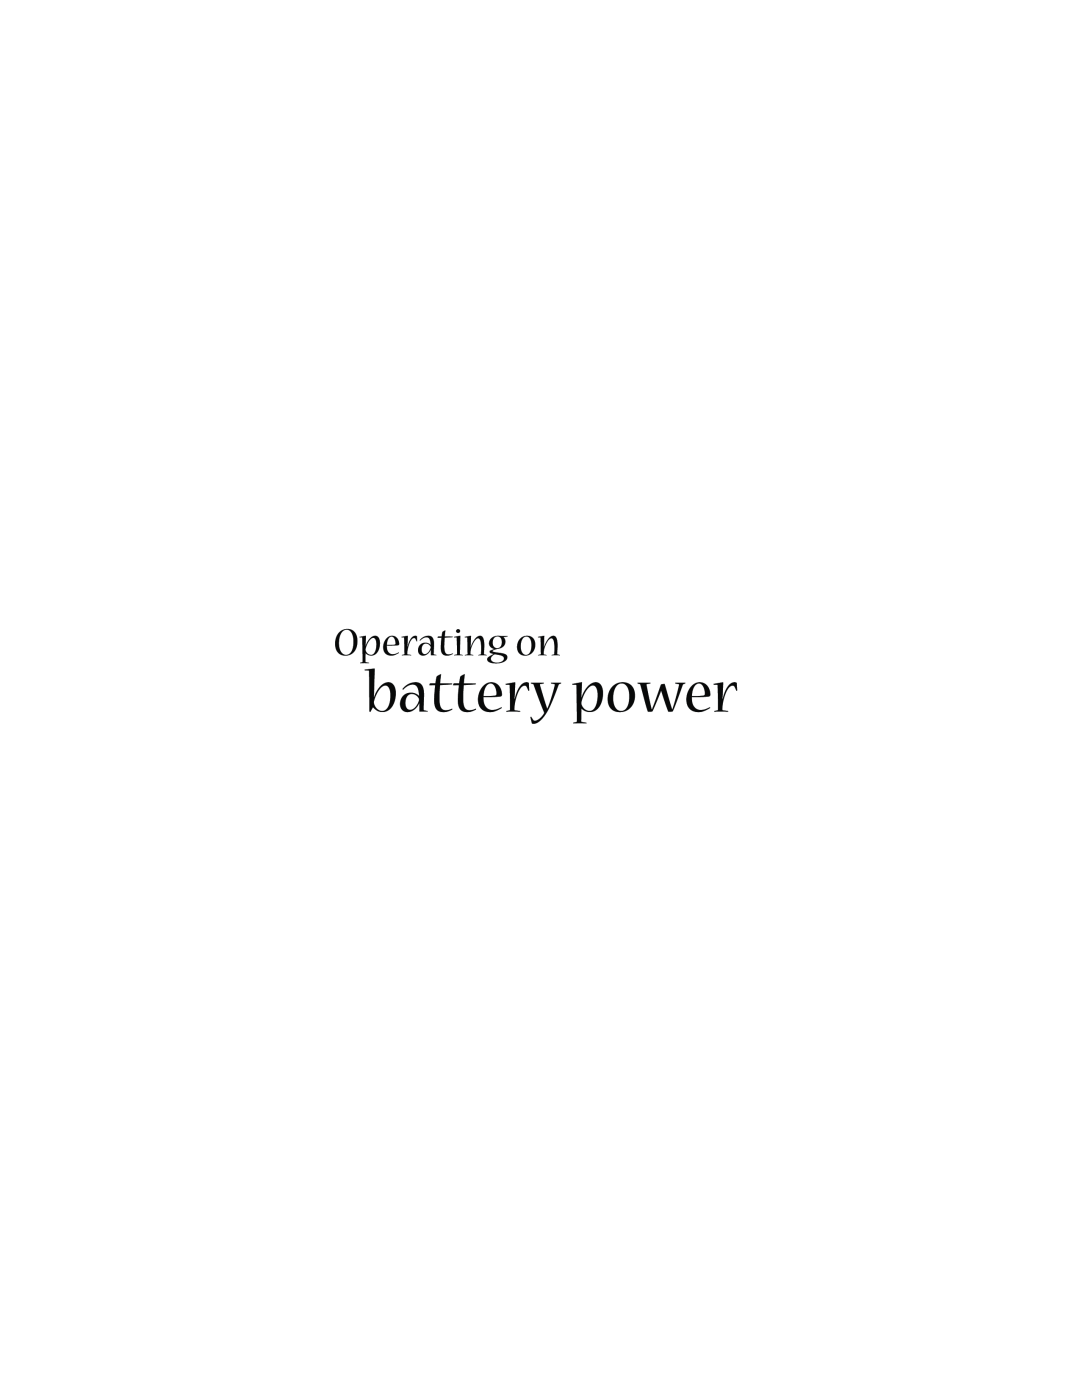 Acer 1400 manual battery power, Operating on 